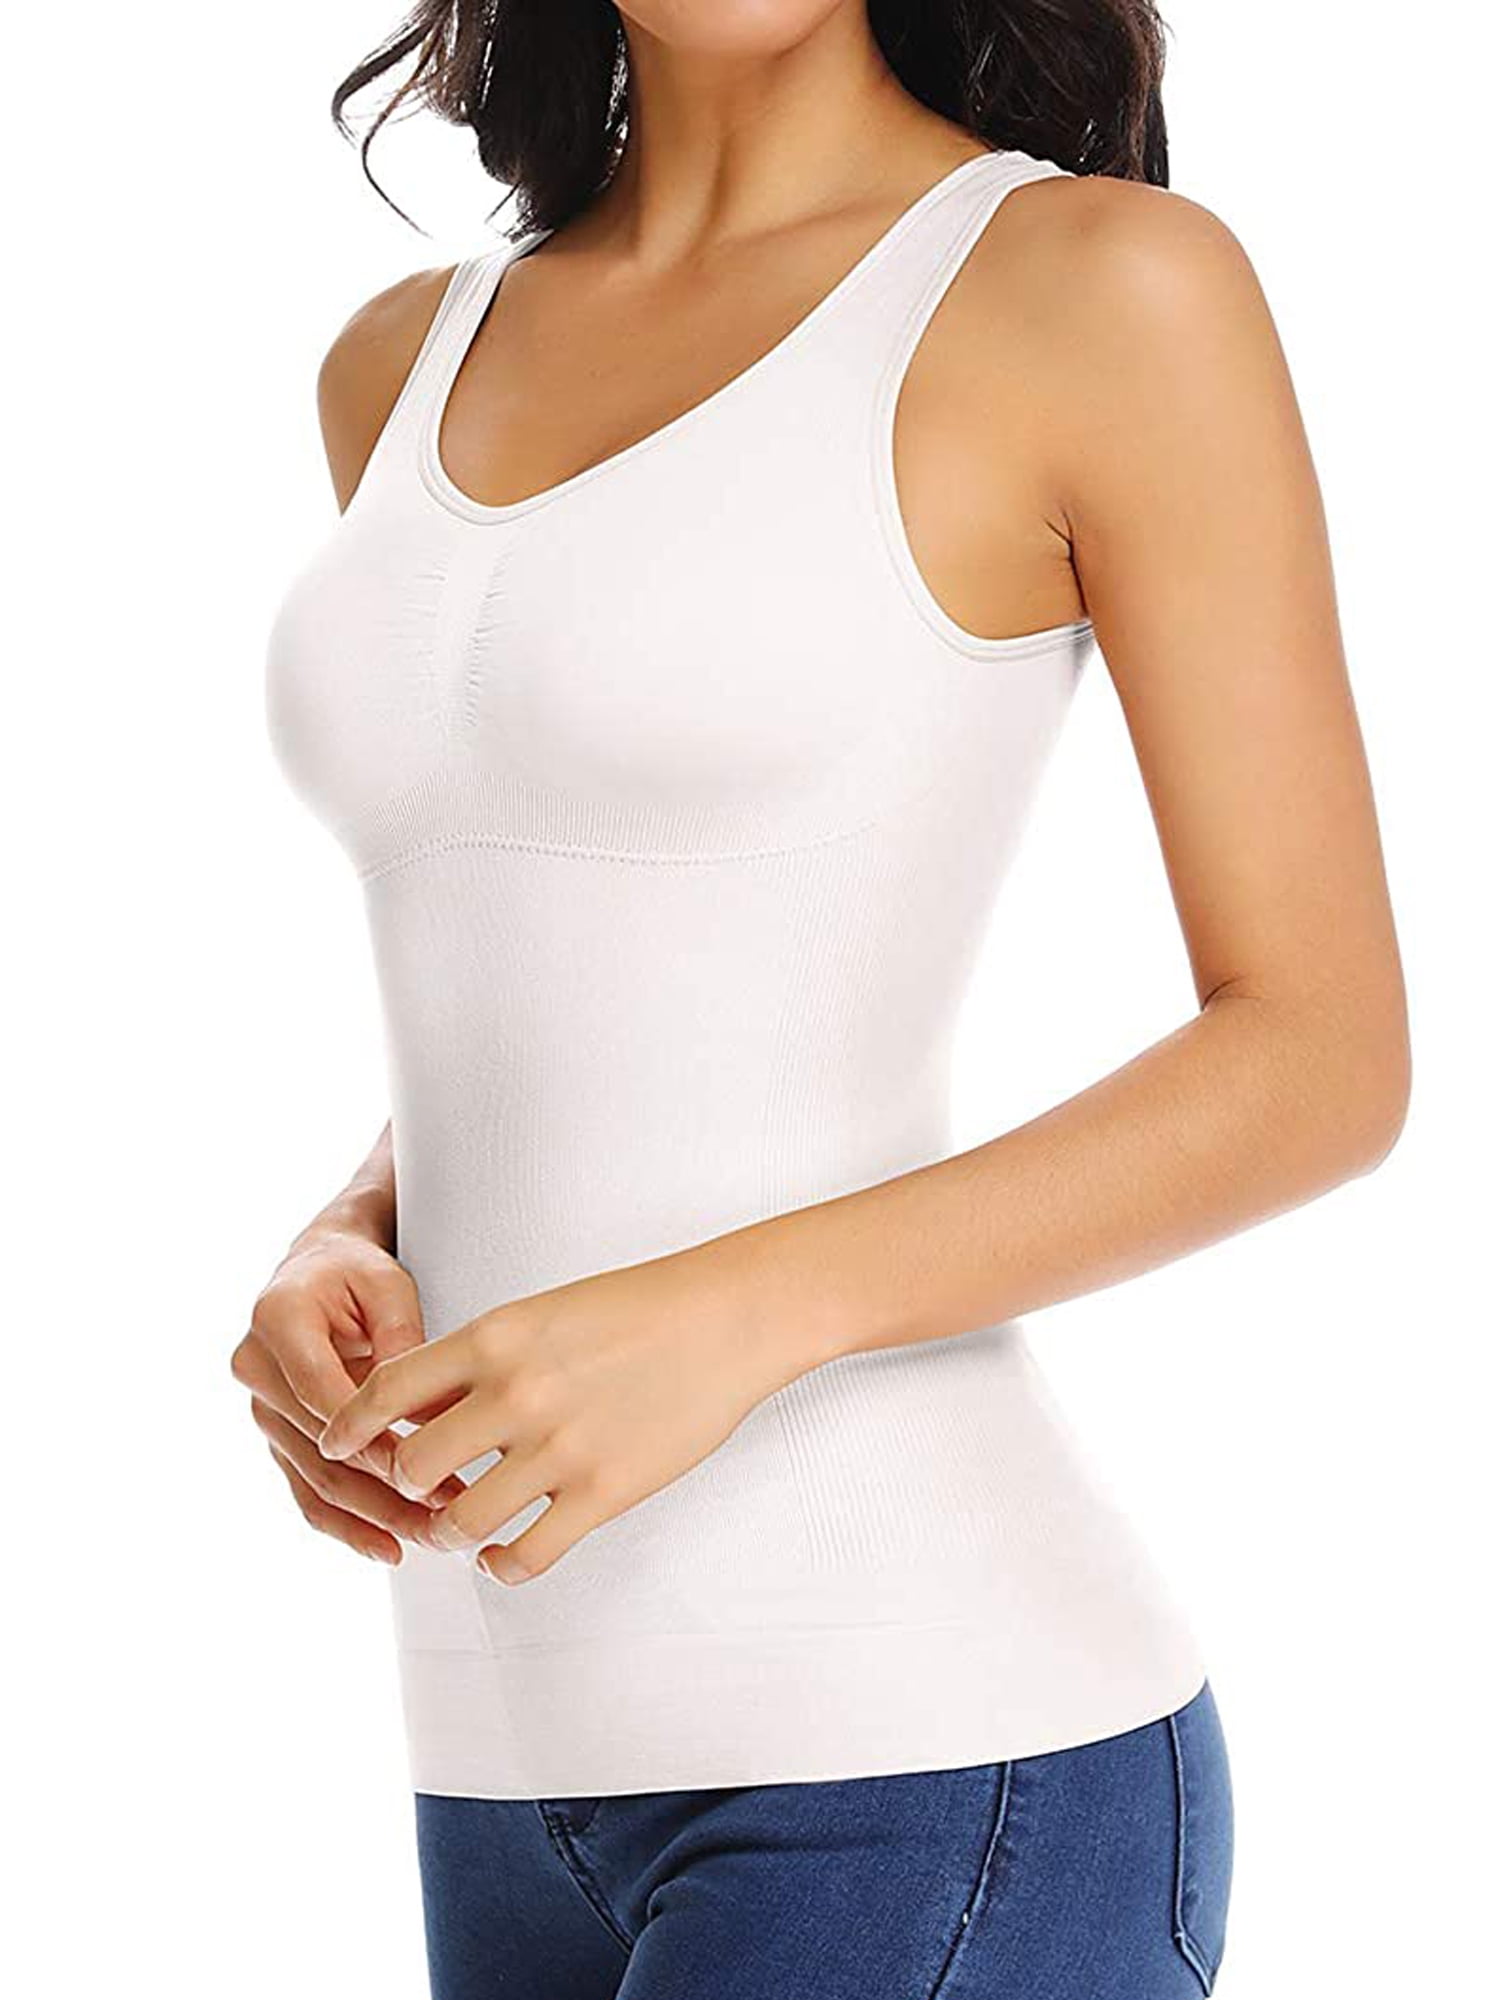 Women's Camisole with Shelf Bra Tank Tops for Layering Stretch